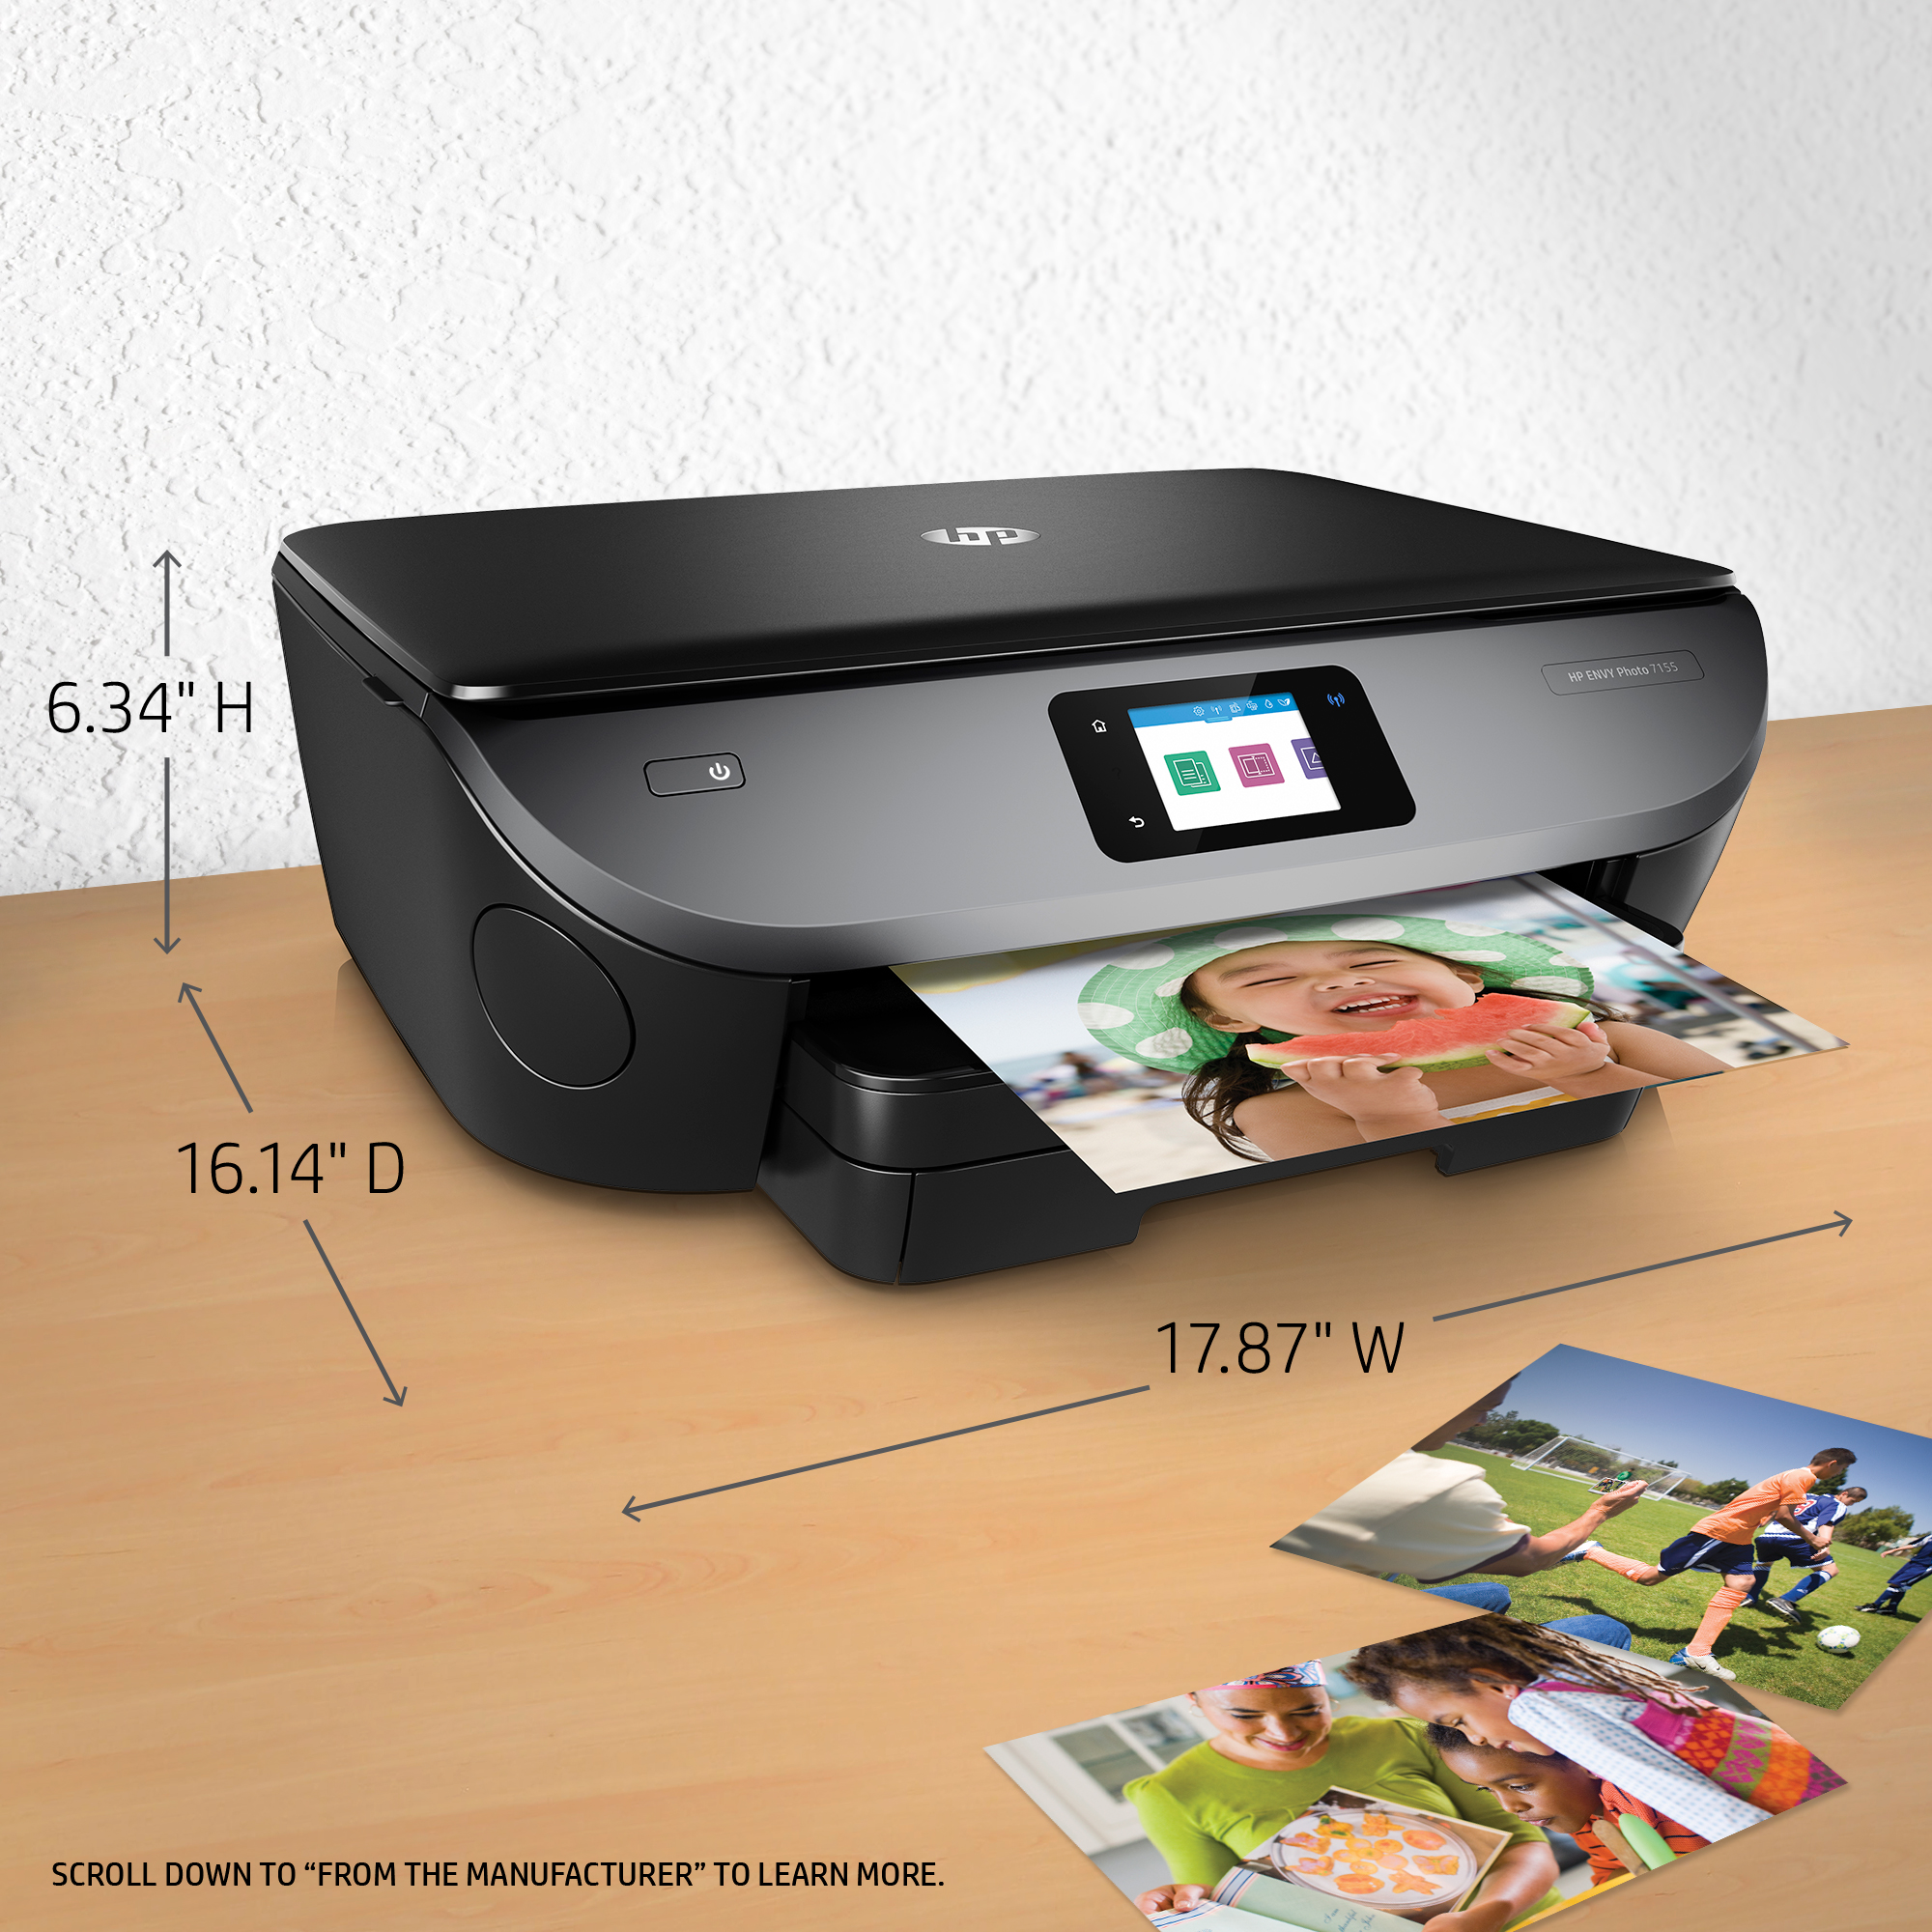 HP ENVY Photo 7155 All-in-One Wireless Photo Printer - image 3 of 14